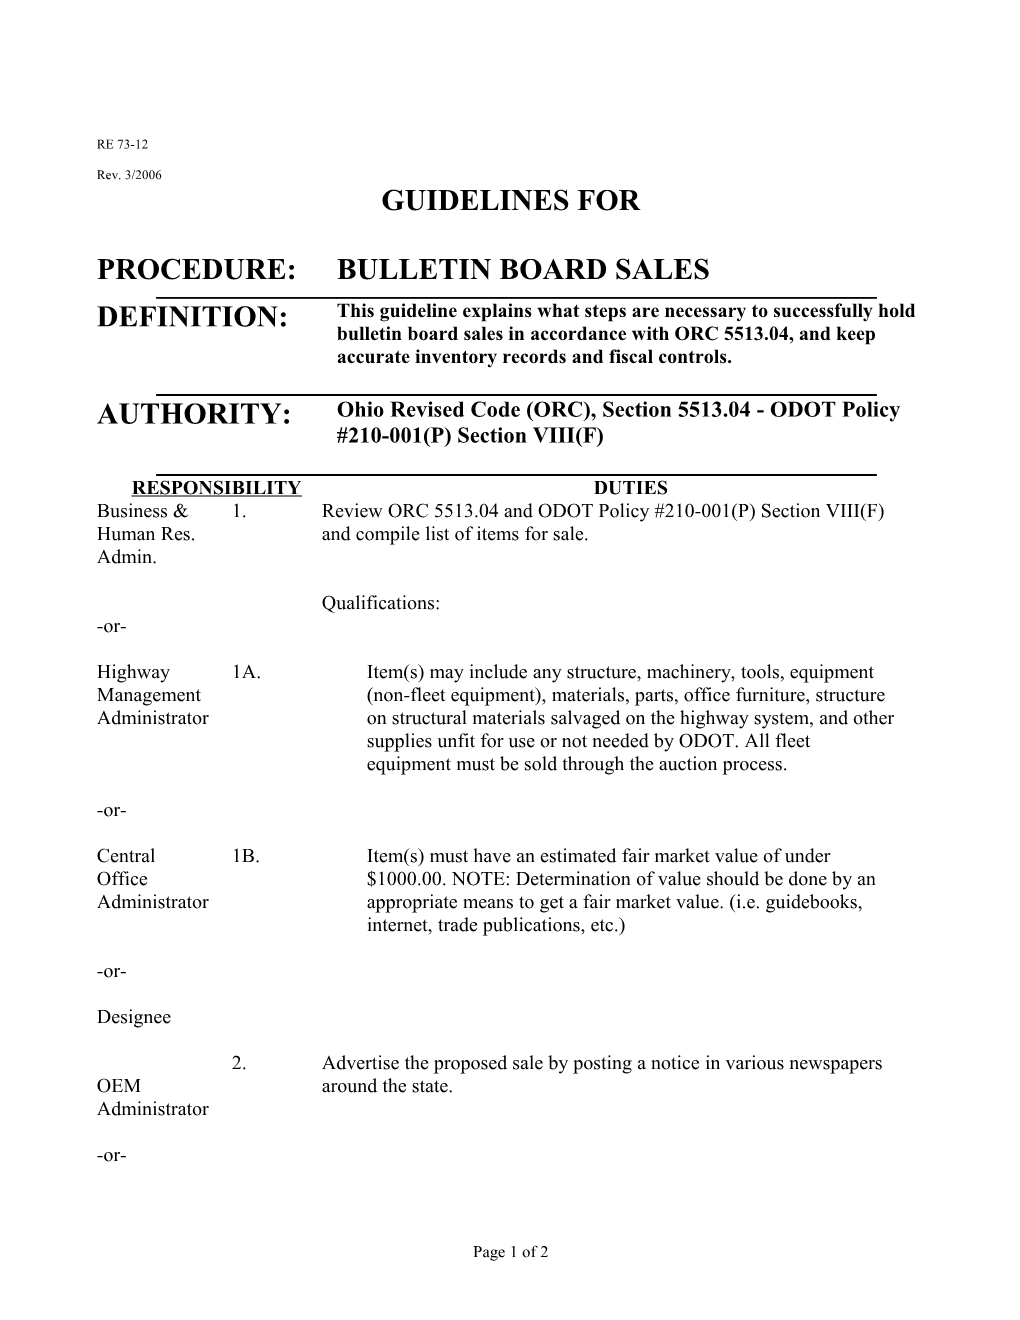 RE 73-12 Guidelines for Internet Sales-Formally Bulletin Board Sales